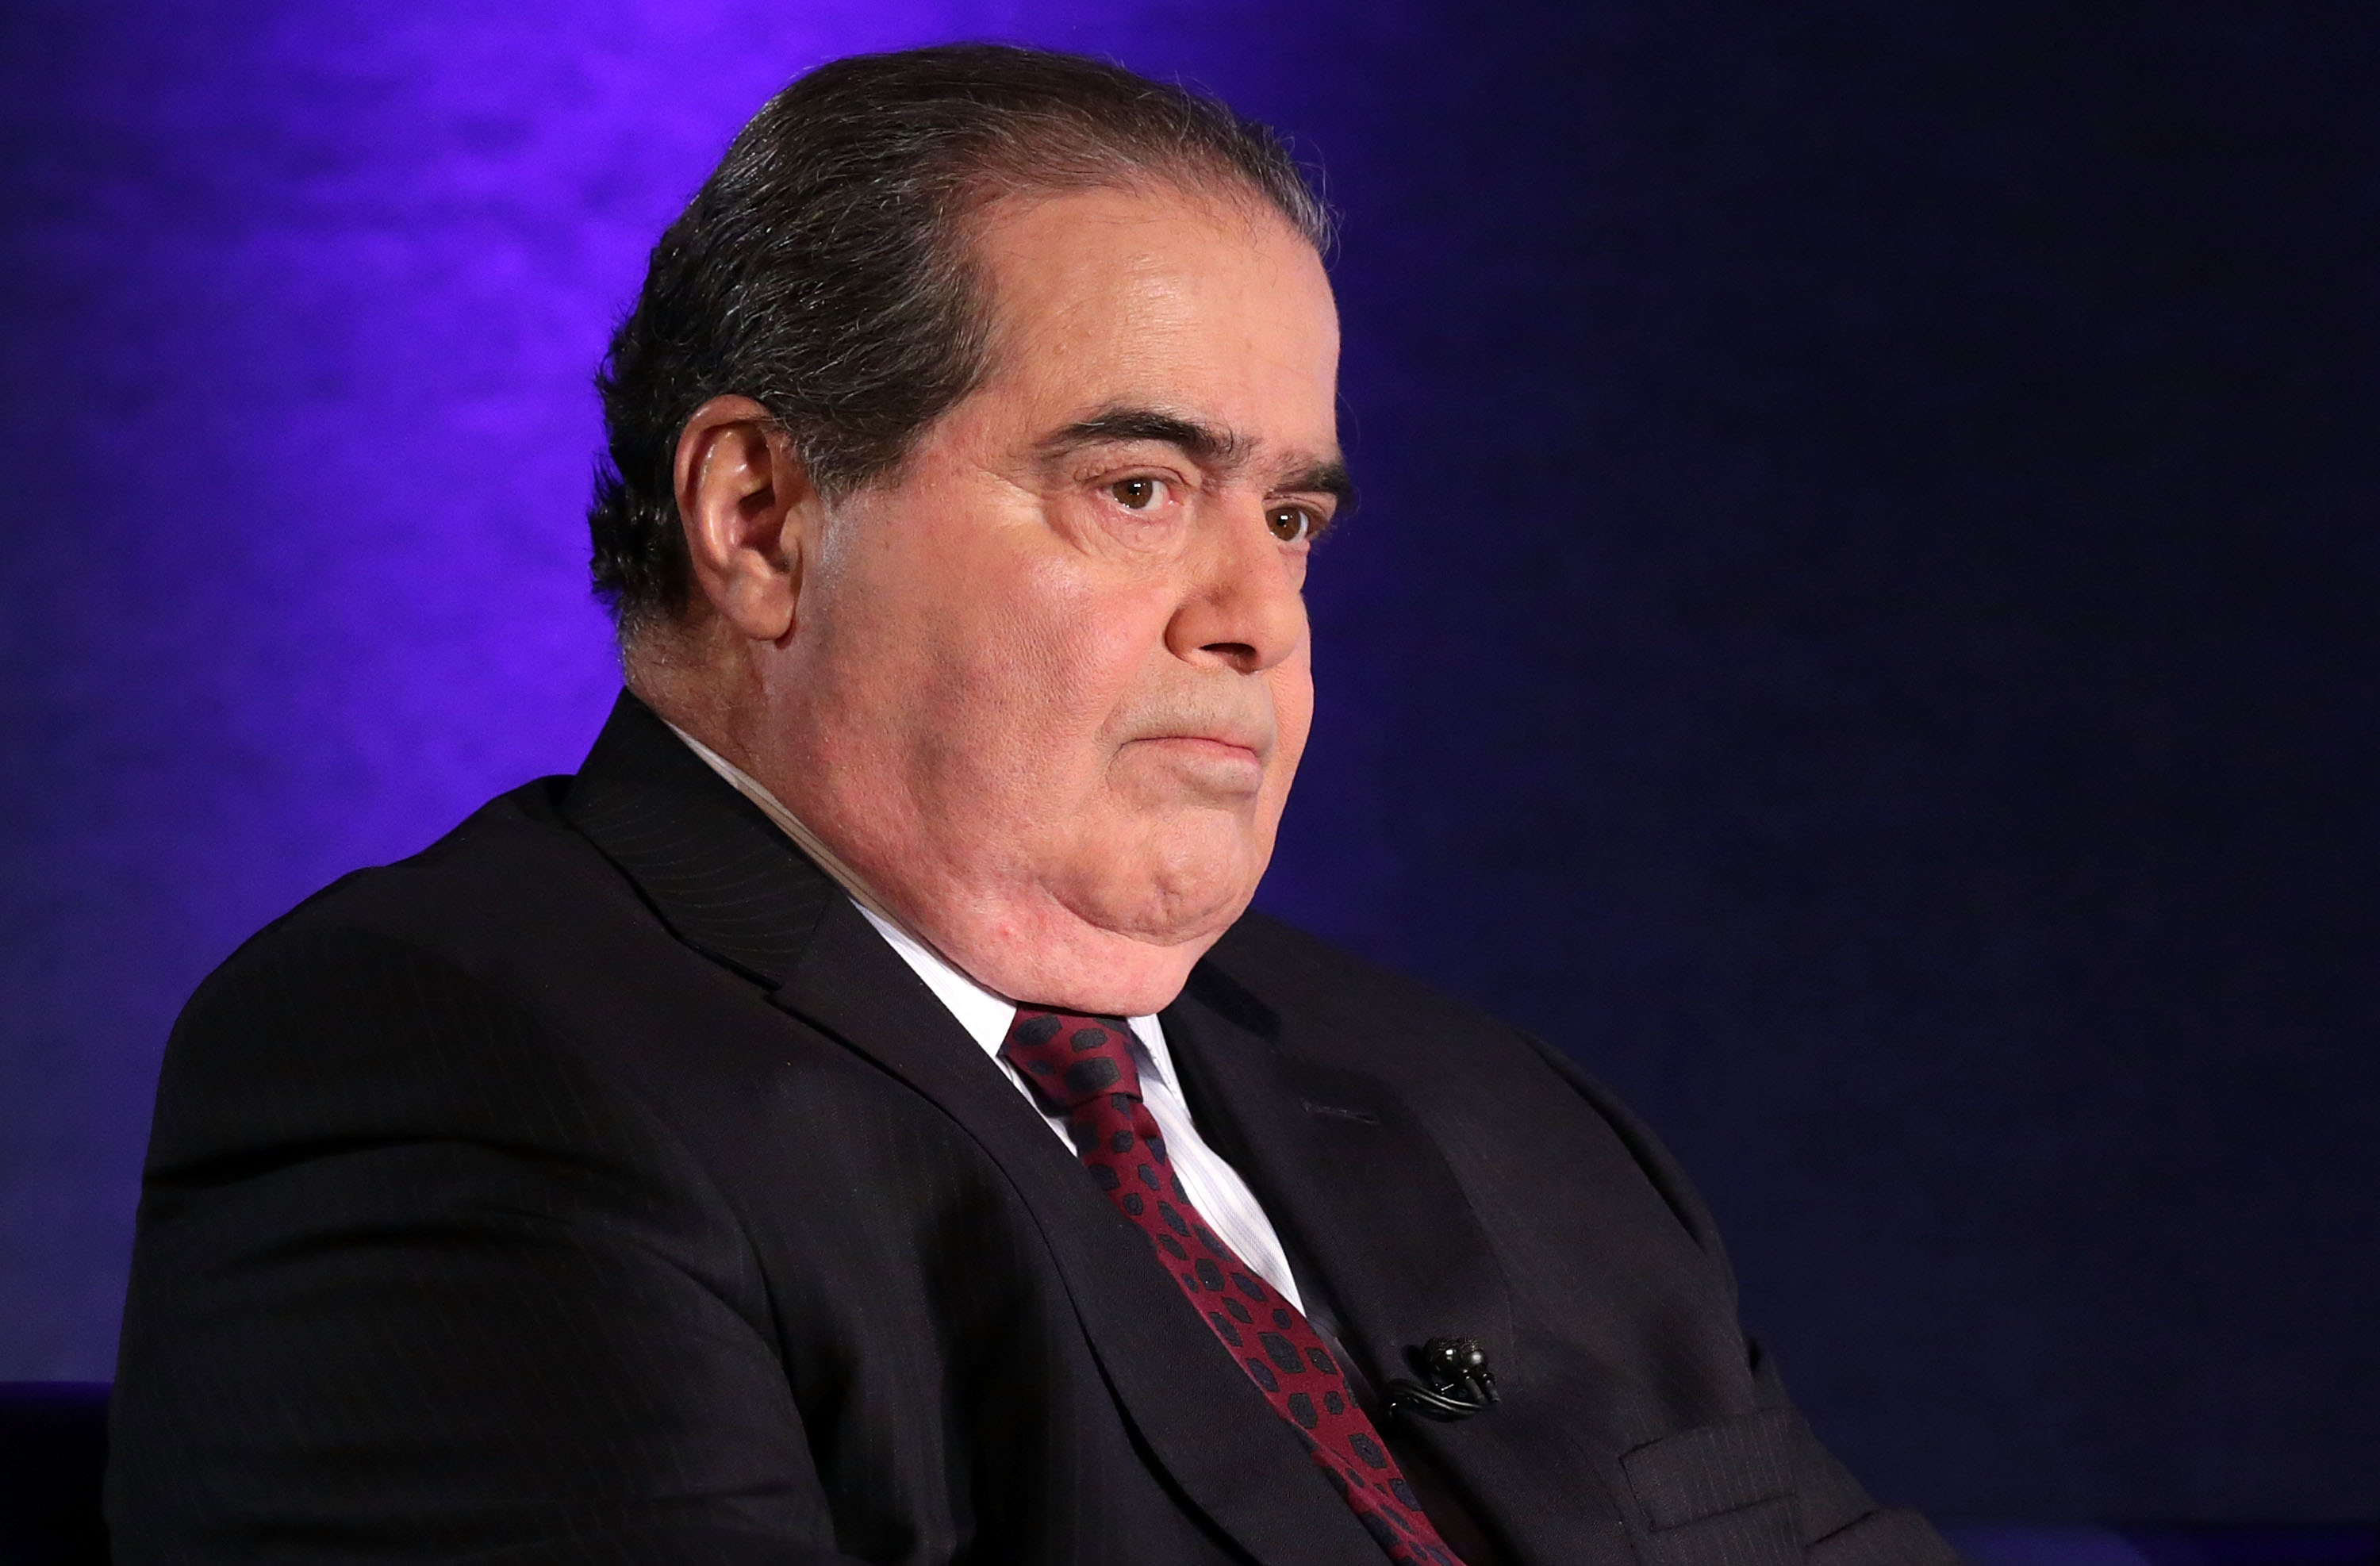 Supreme Court Justice Antonin Scalia waits for the beginning of the taping of "The Kalb Report" on April 17, 2014 at the National Press Club in Washington.